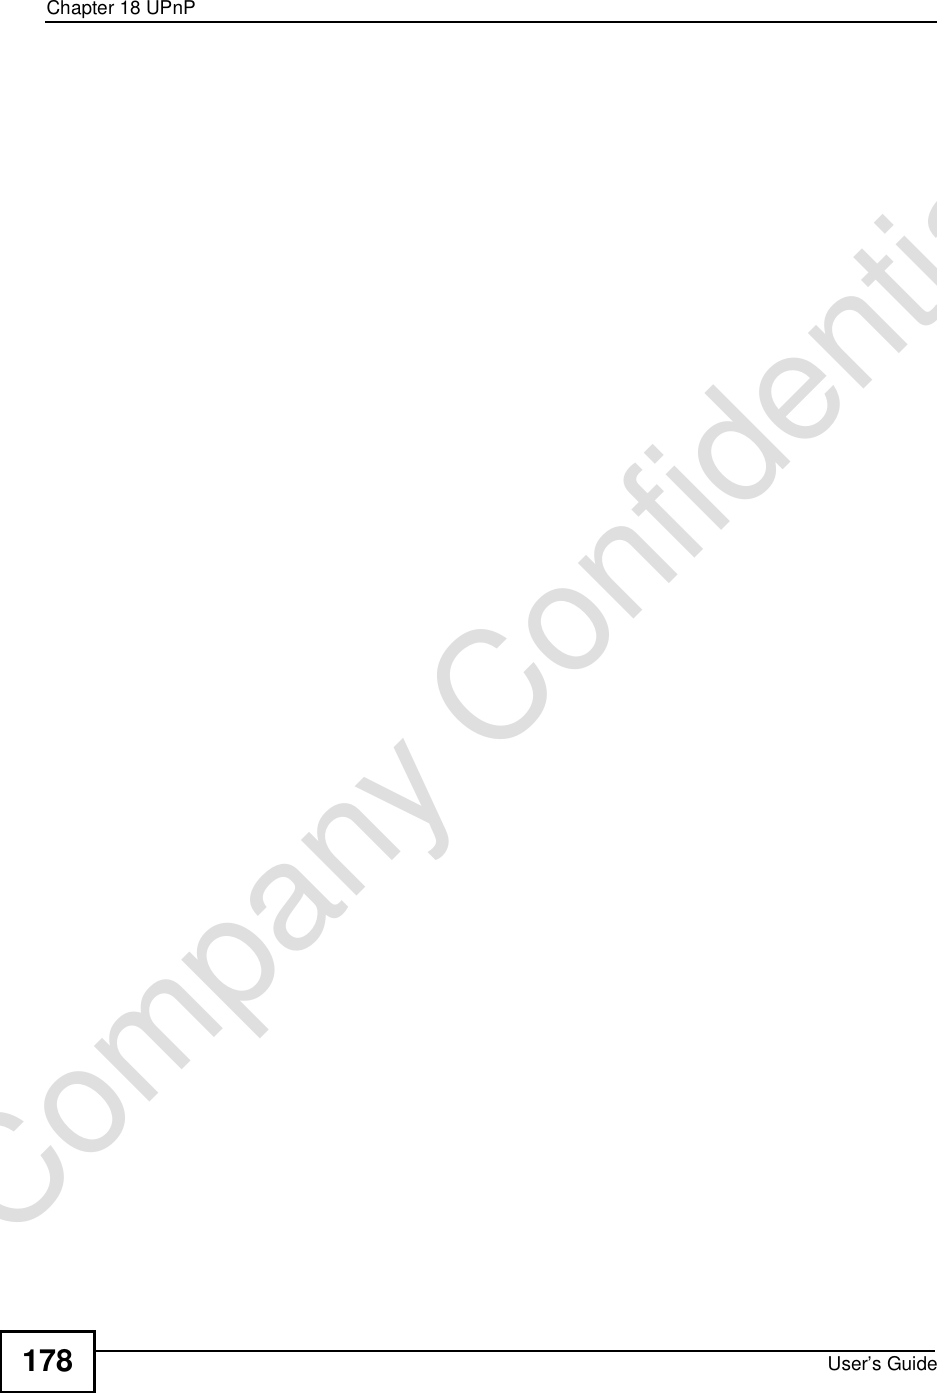 Chapter 18UPnPUser’s Guide178Company Confidential